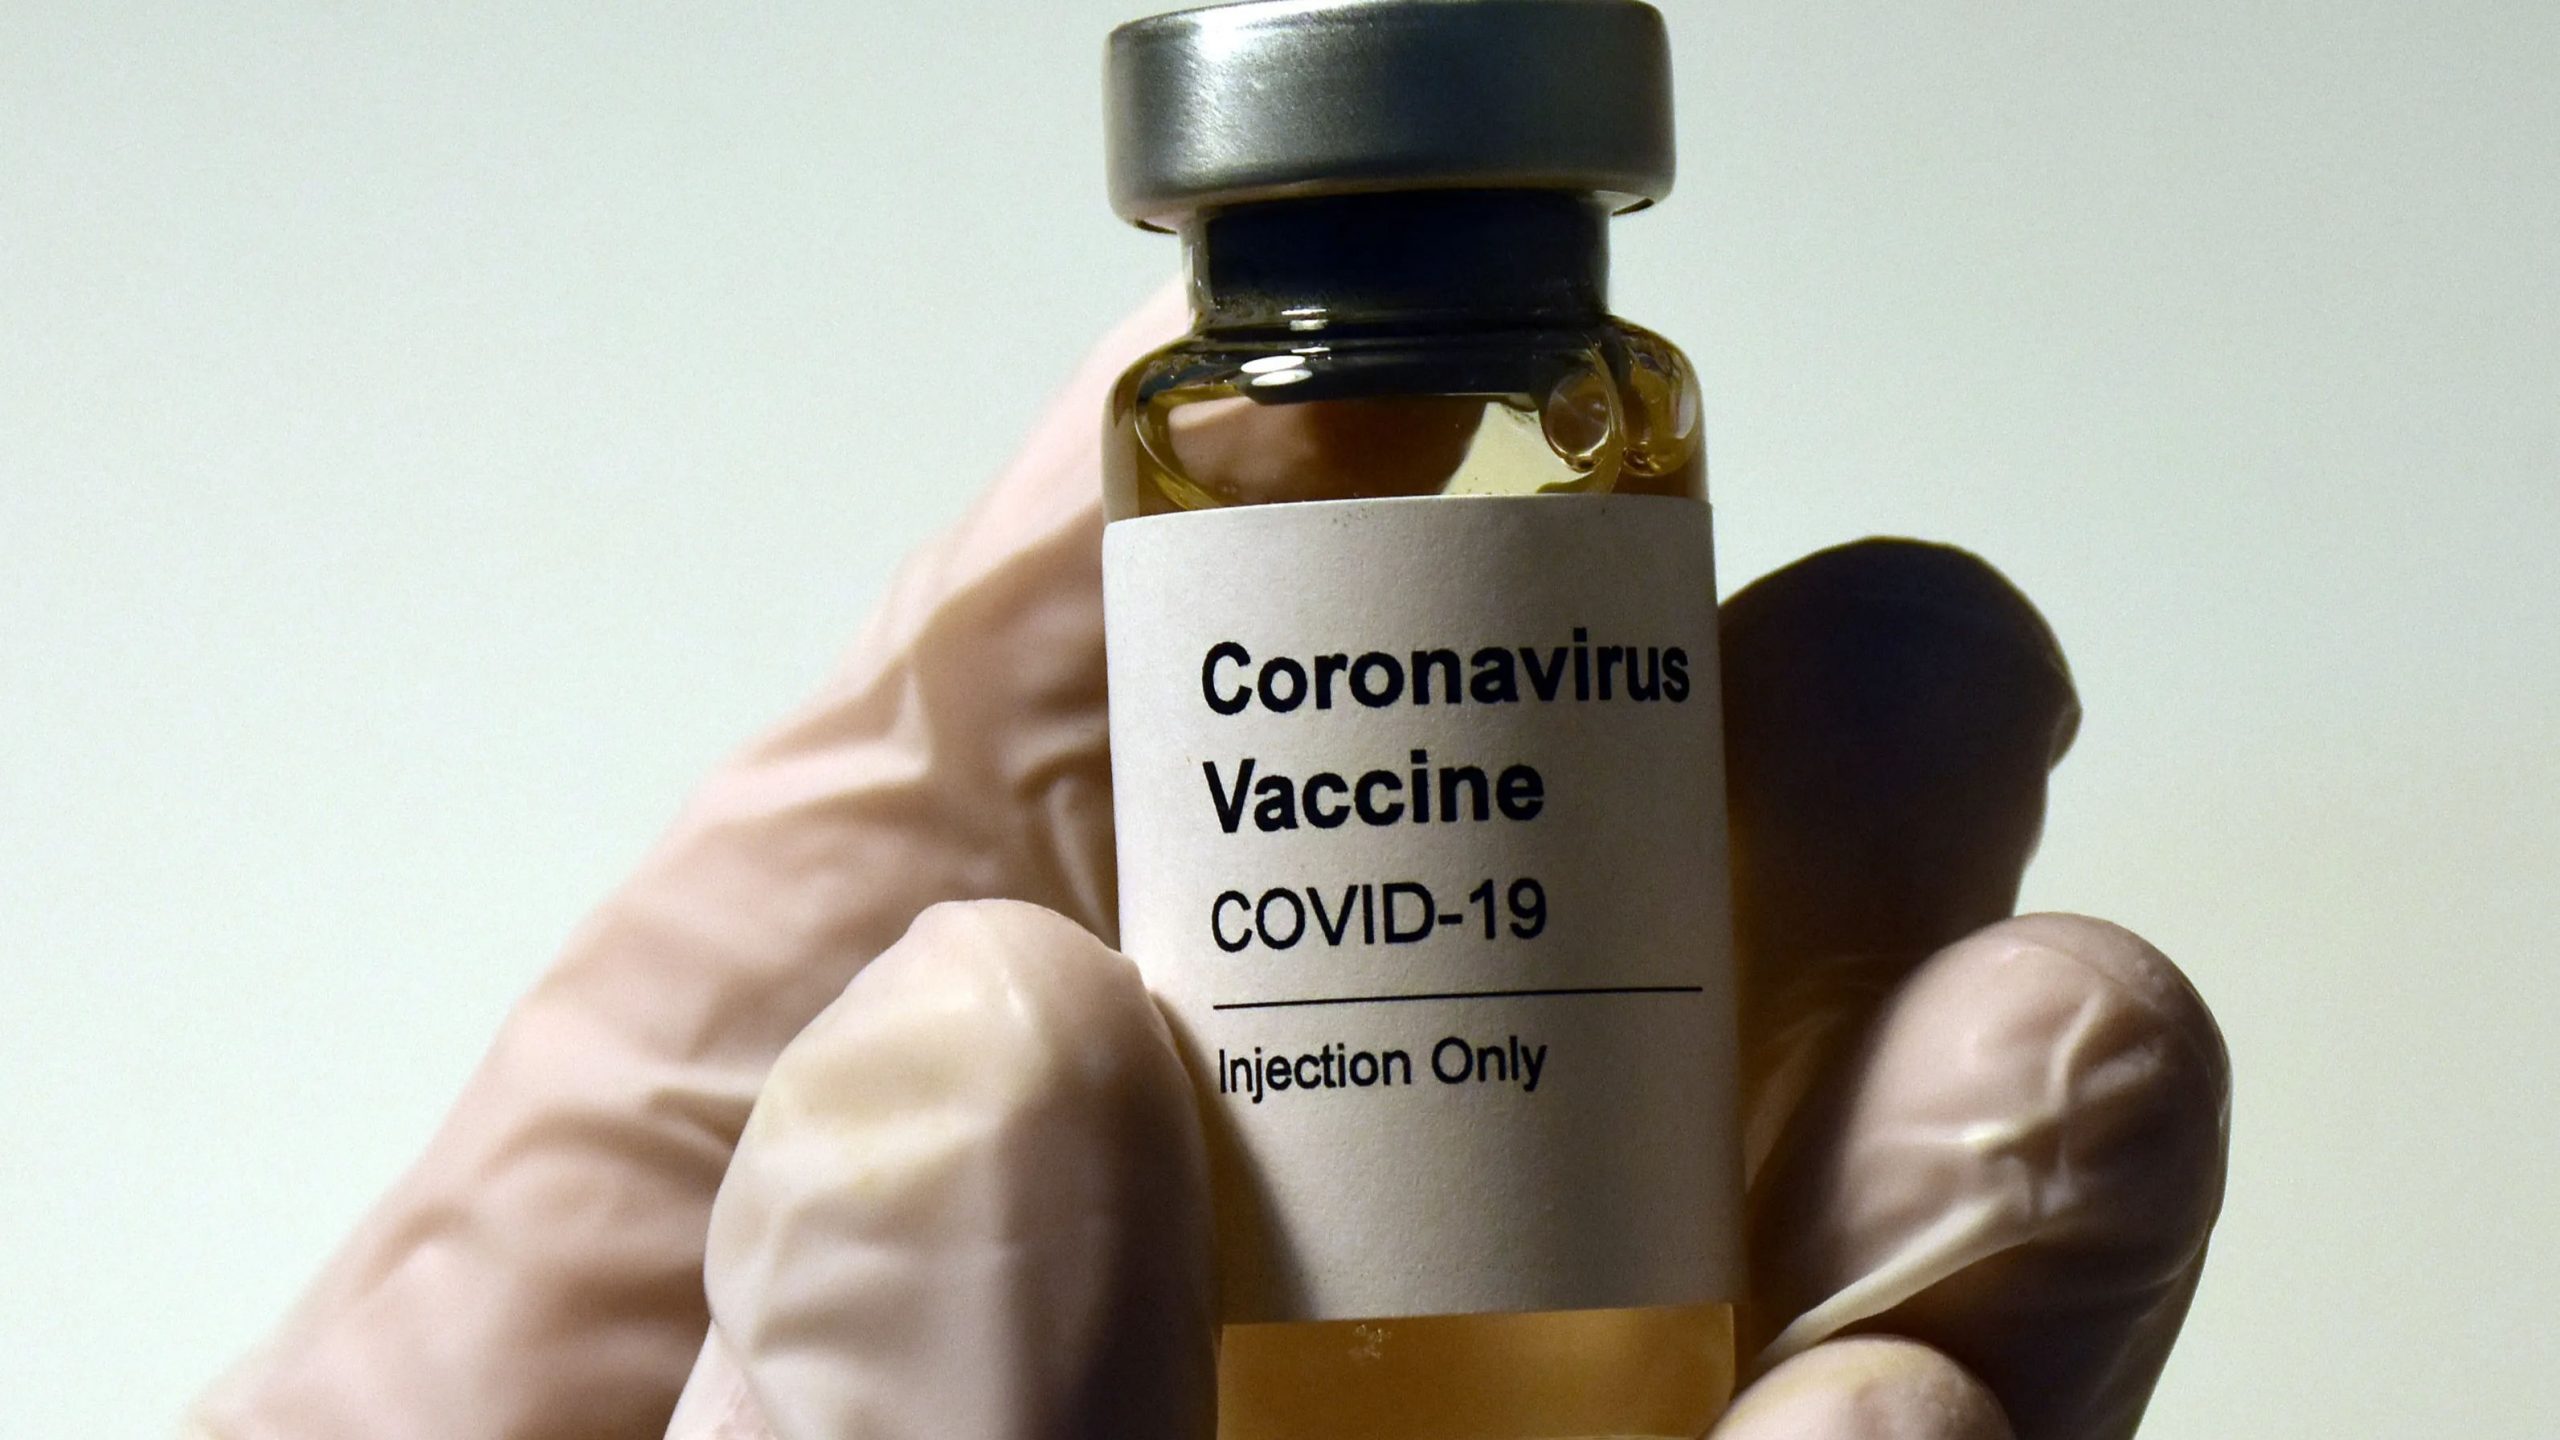 Palestine cancels COVID vaccine deal with Israel citing the expiry of doses